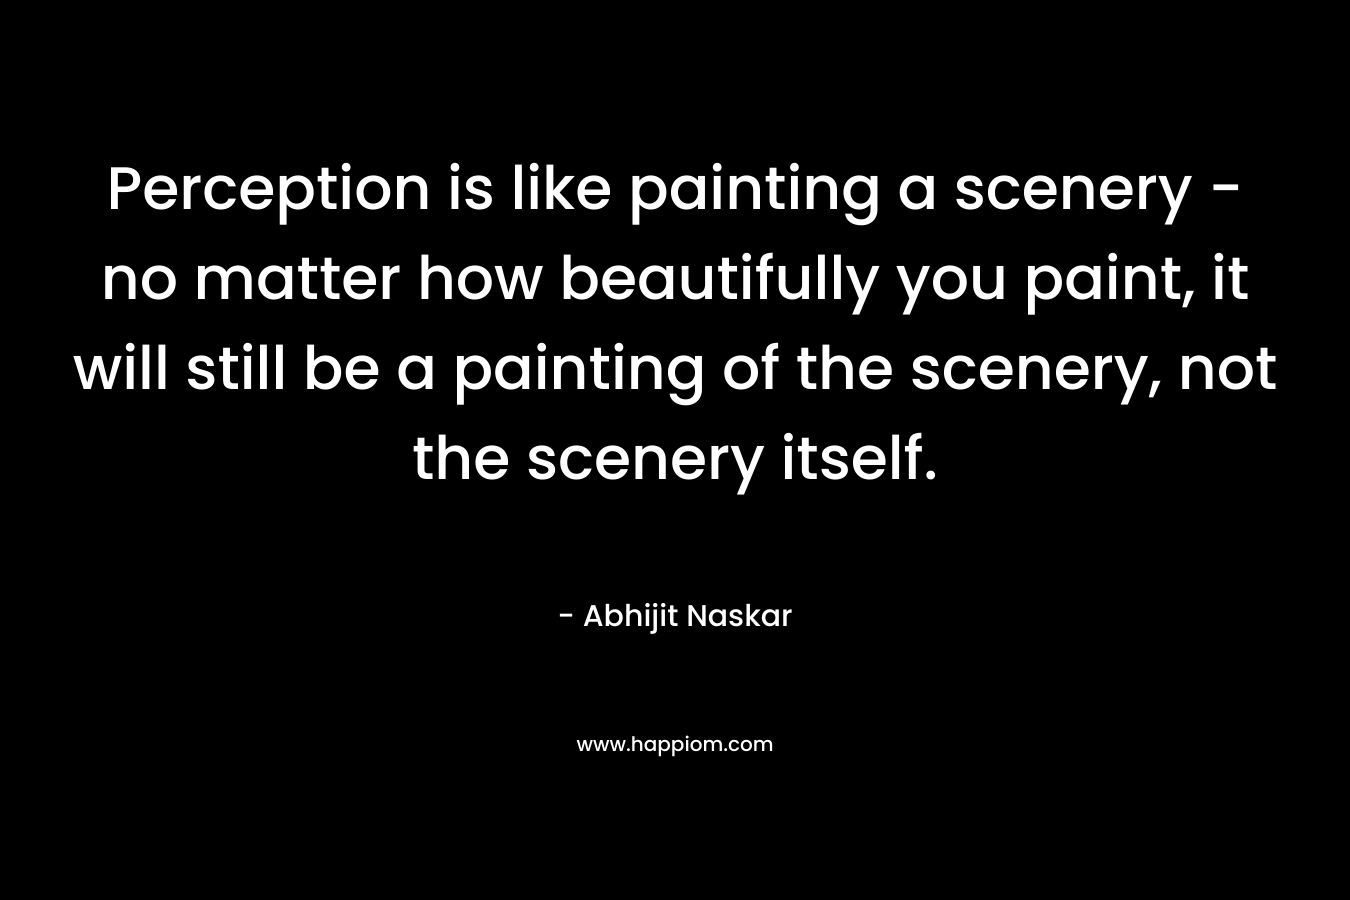 Perception is like painting a scenery - no matter how beautifully you paint, it will still be a painting of the scenery, not the scenery itself.